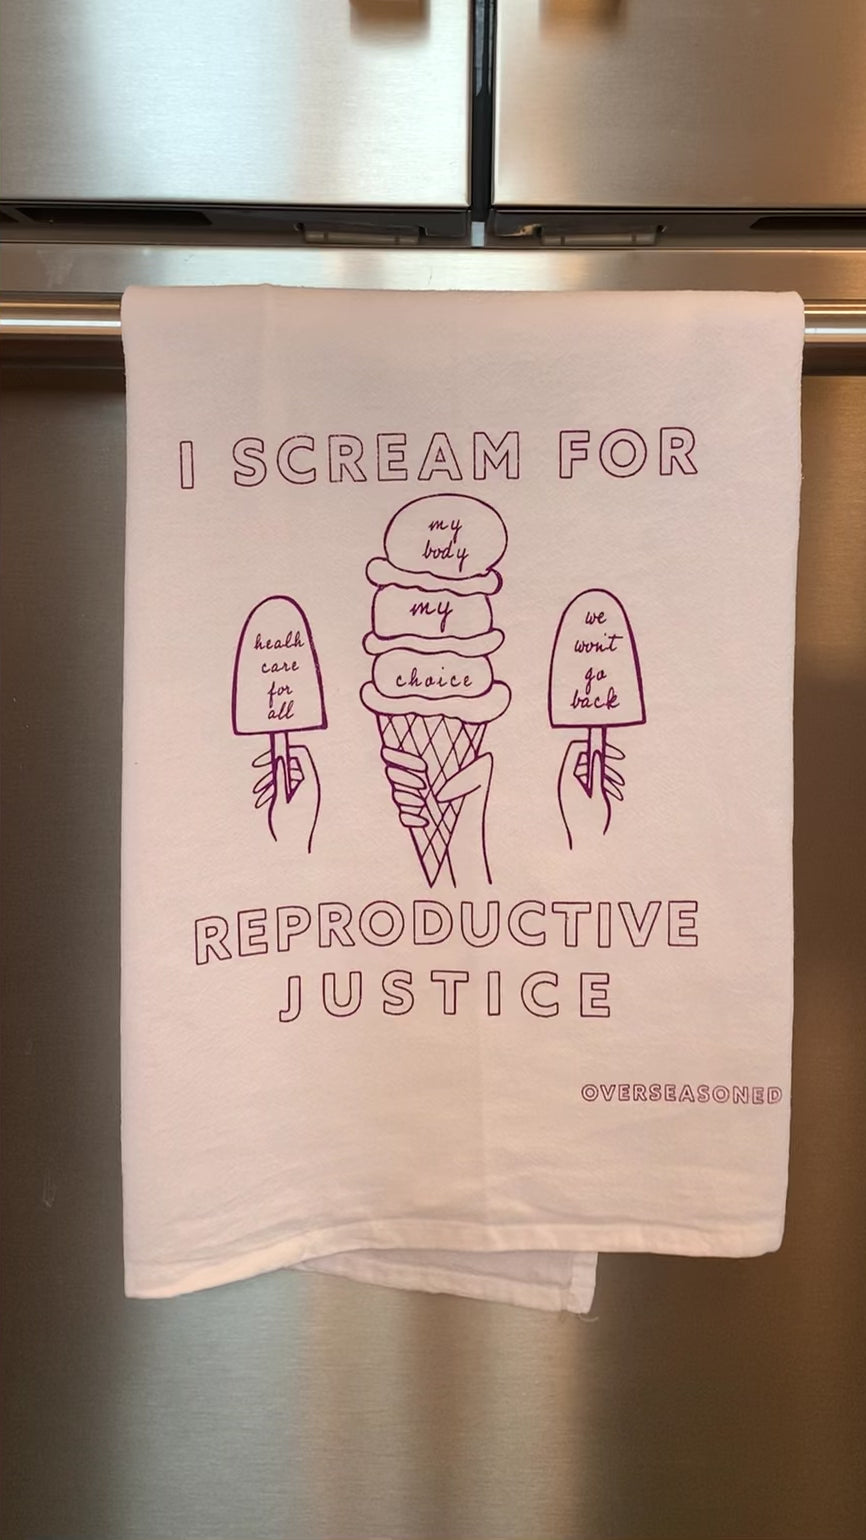 A white tea towel with raspberry block letters that reads "I scream for reproductive justice" hangs in a kitchen